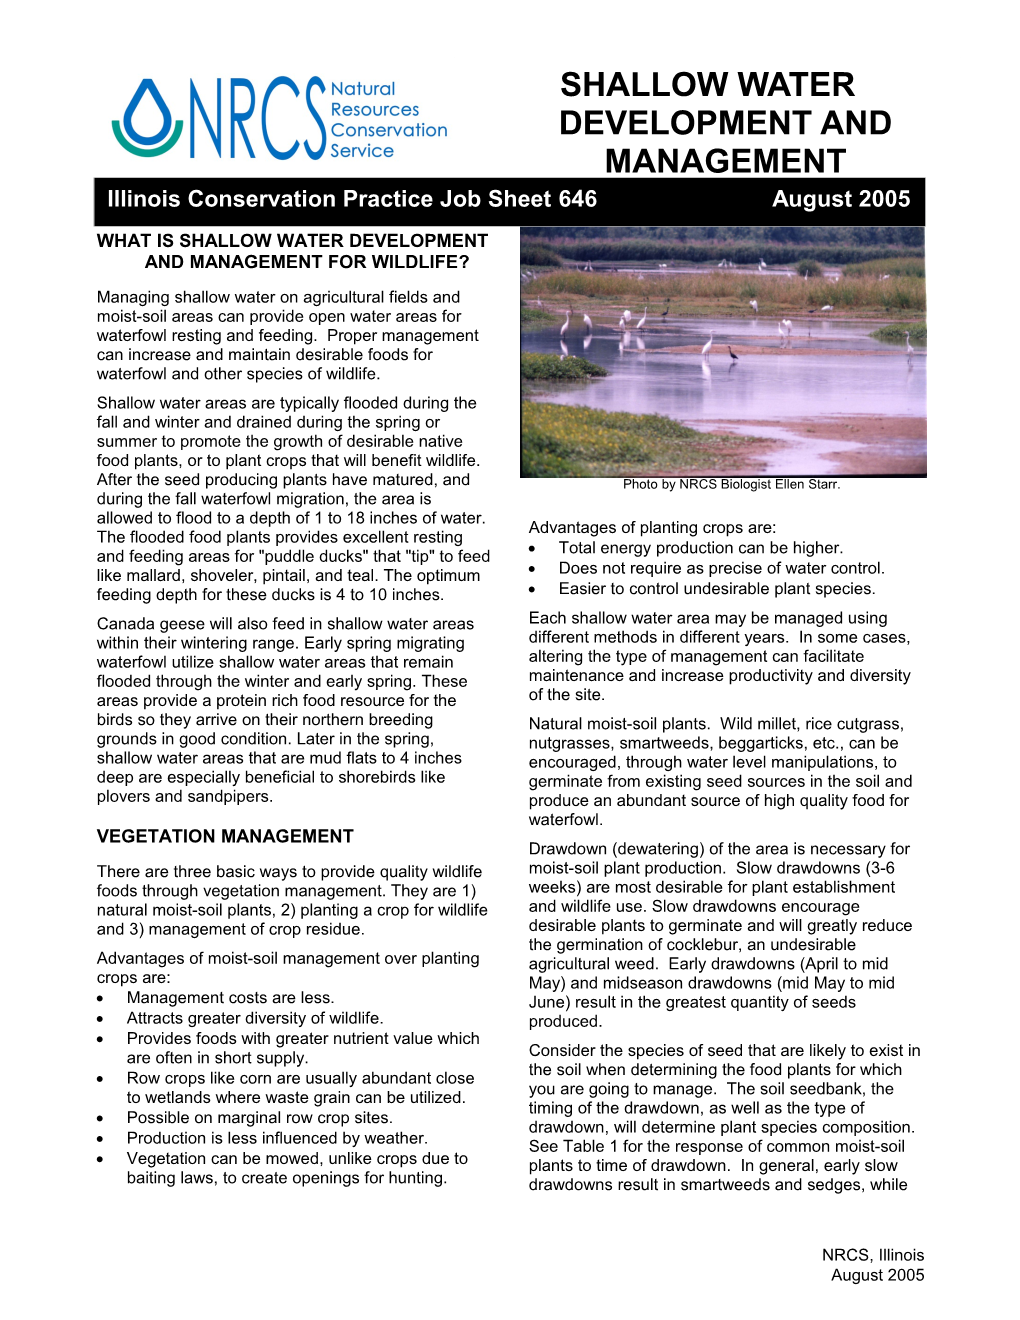 What Is Shallow Water DEVELOPMENT and Management for WILDLIFE?